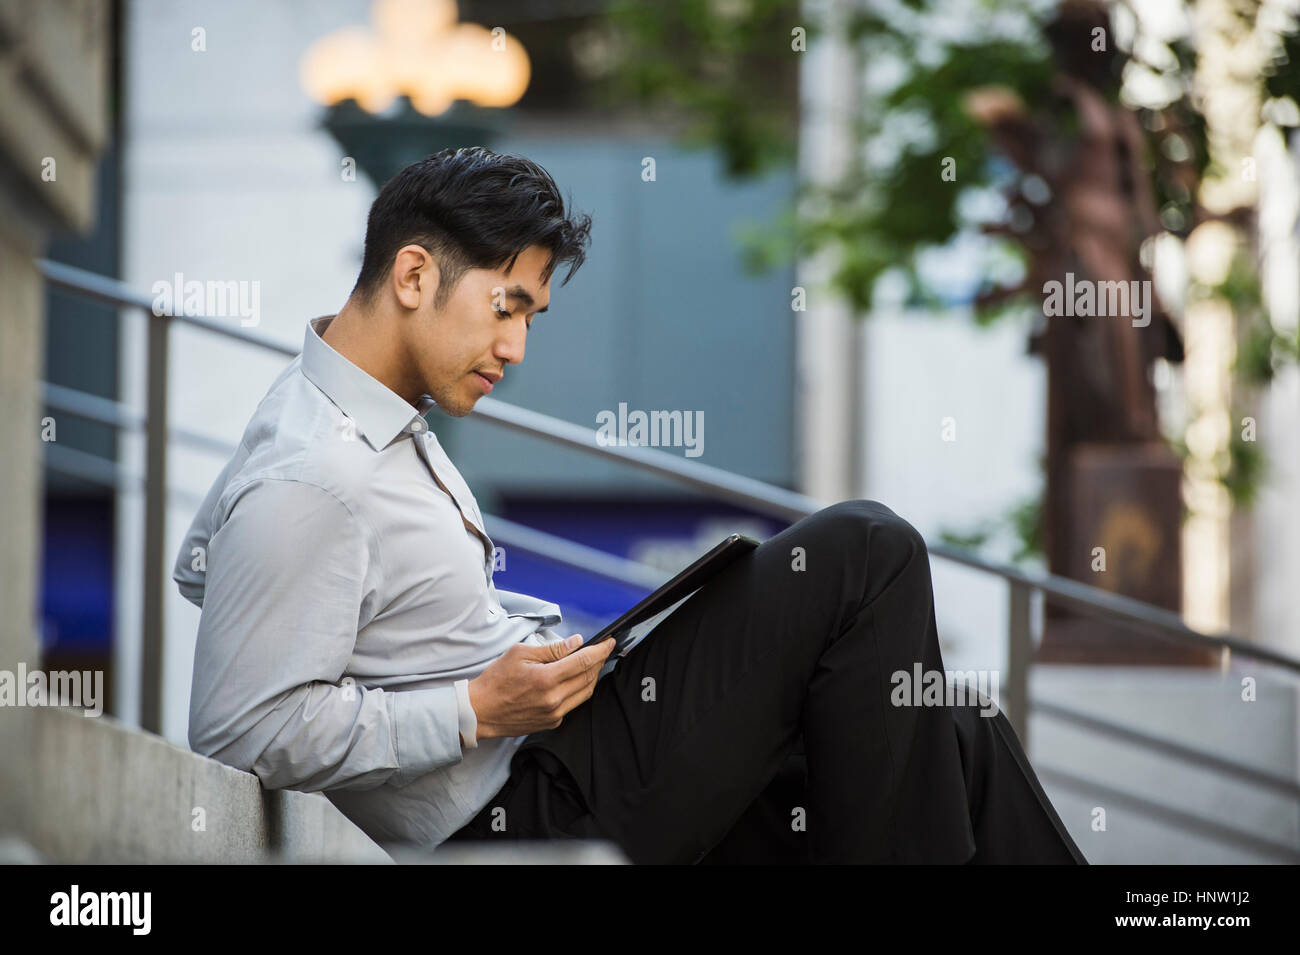 Chinese businessman reading digital tablet on staircase Stock Photo